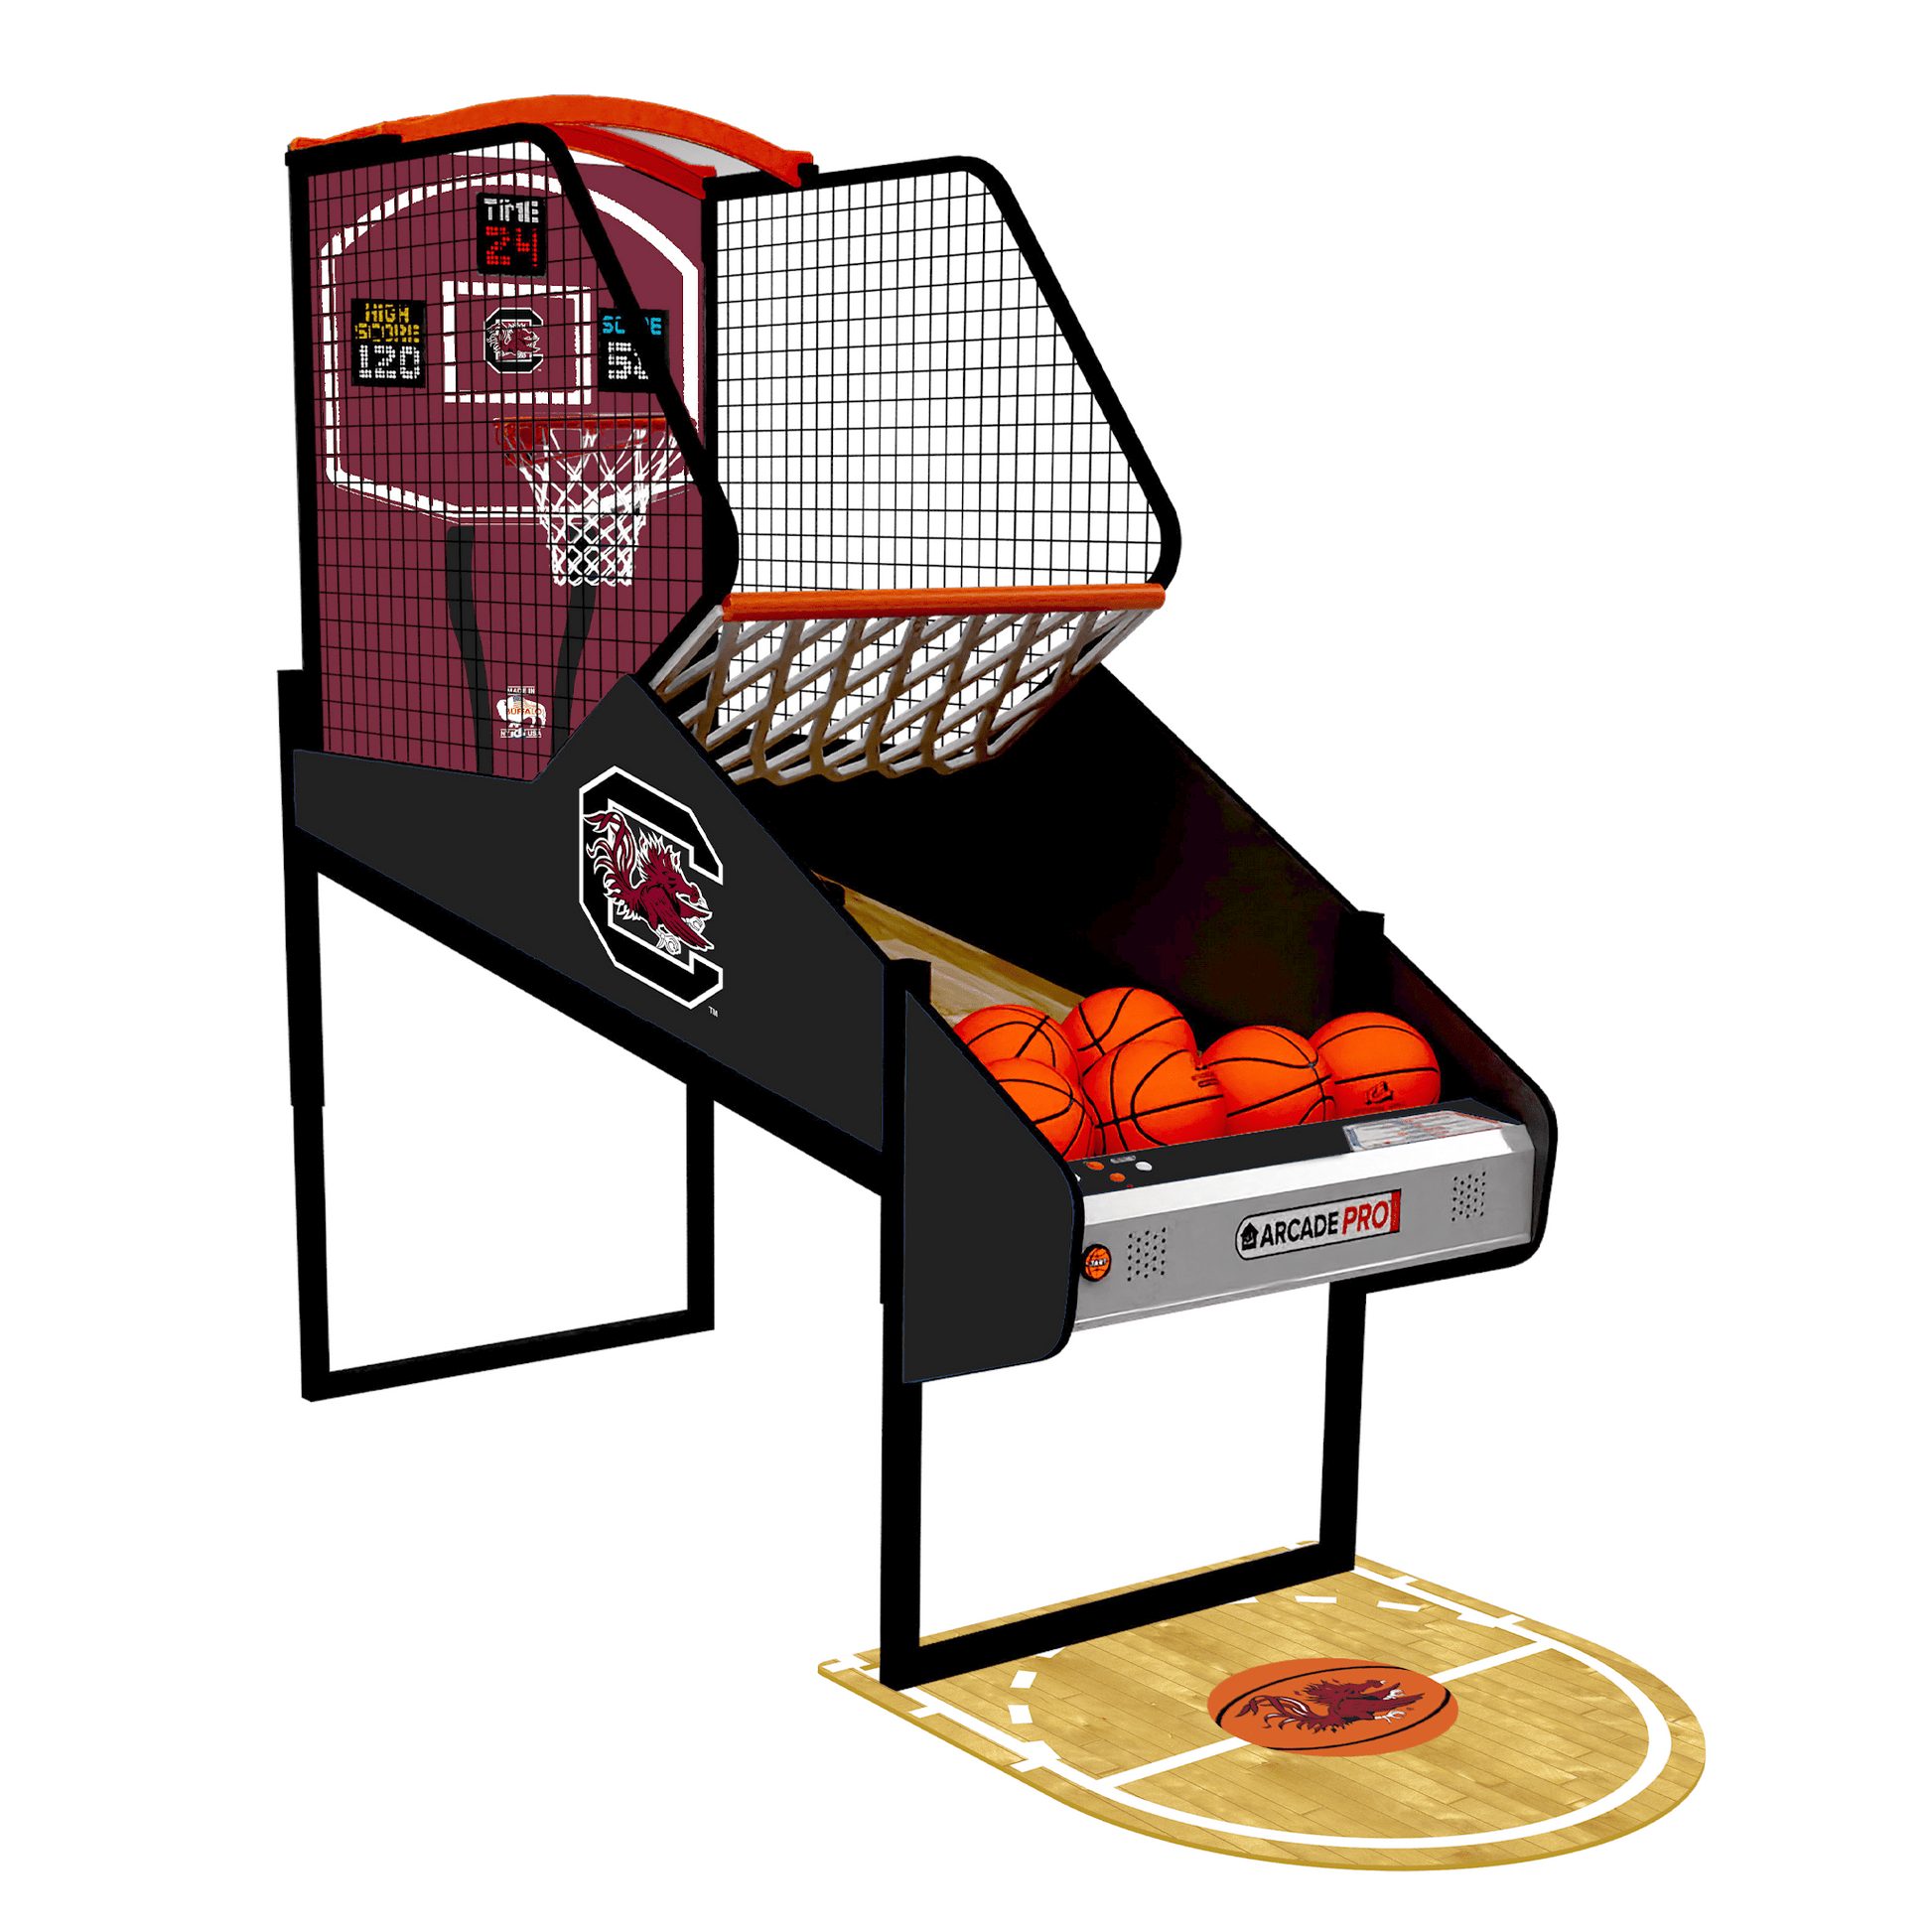 University of South Carolina Gamecocks College Hoops Arcade Innovative Concepts in Entertainment   